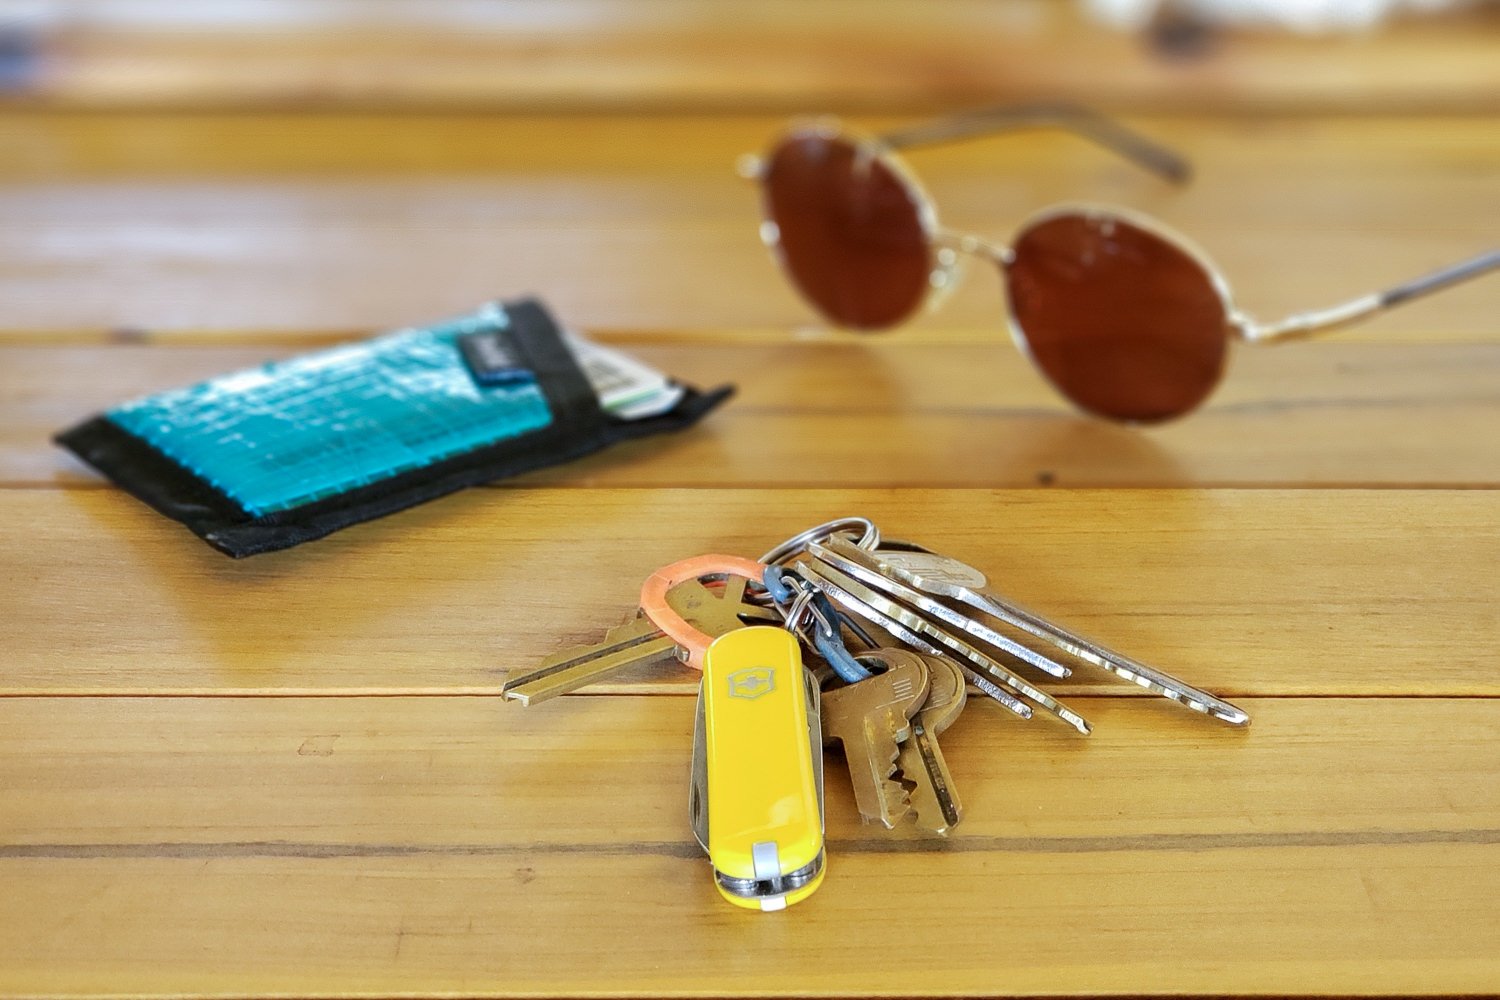 The Swiss Army Classic multitool sitting on a table next to a wallet and sunglasses